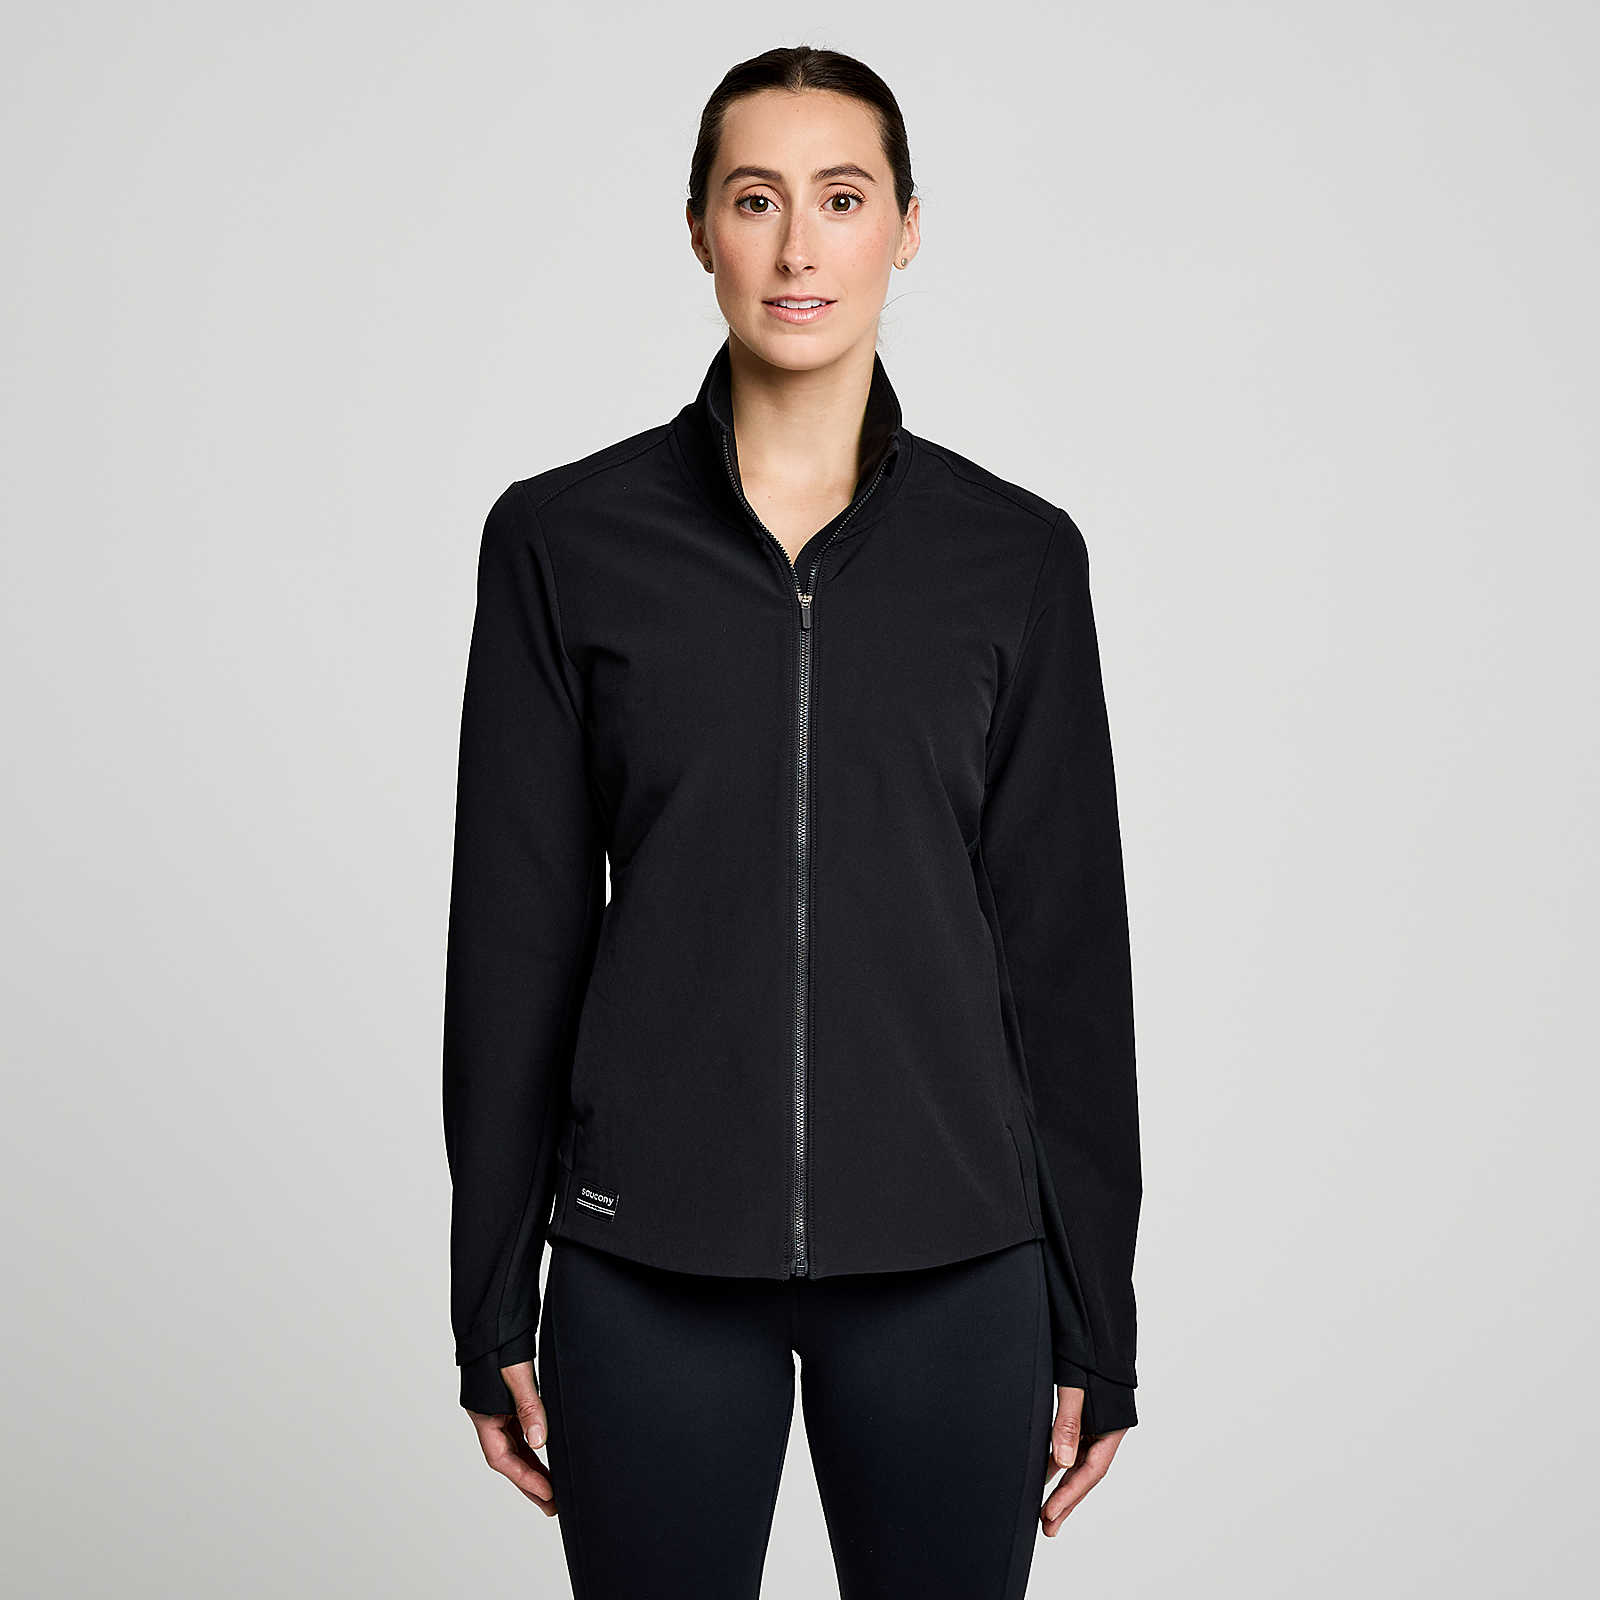 WOMEN'S TRIUMPH JACKET | Performance Running Outfitters